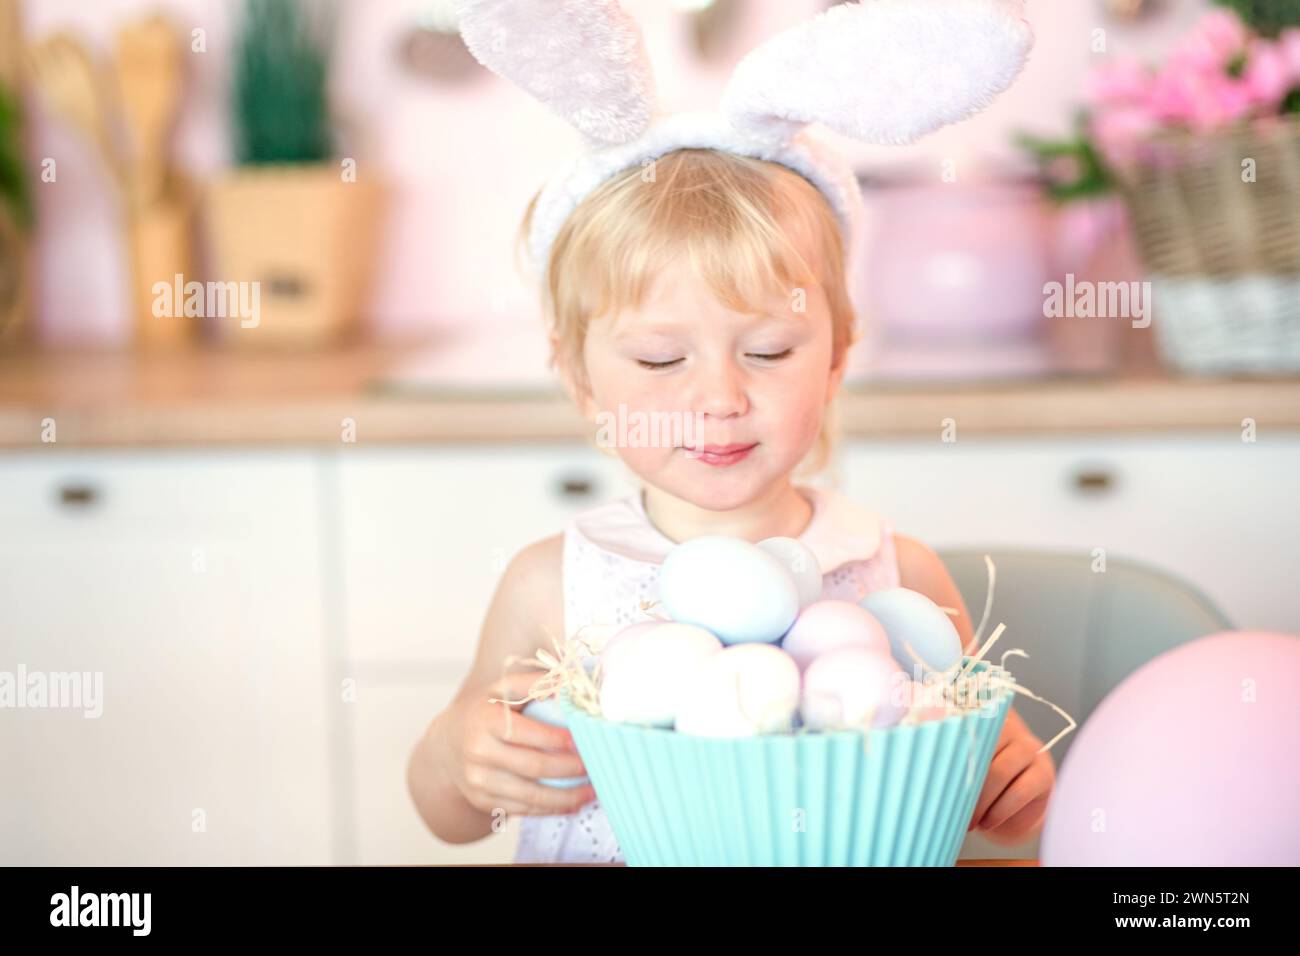 Little 3-year-old girl with plate full of painted easter eggs standing near table in kitchen decorated for Easter. Easter Egg Hunt Concept Stock Photo